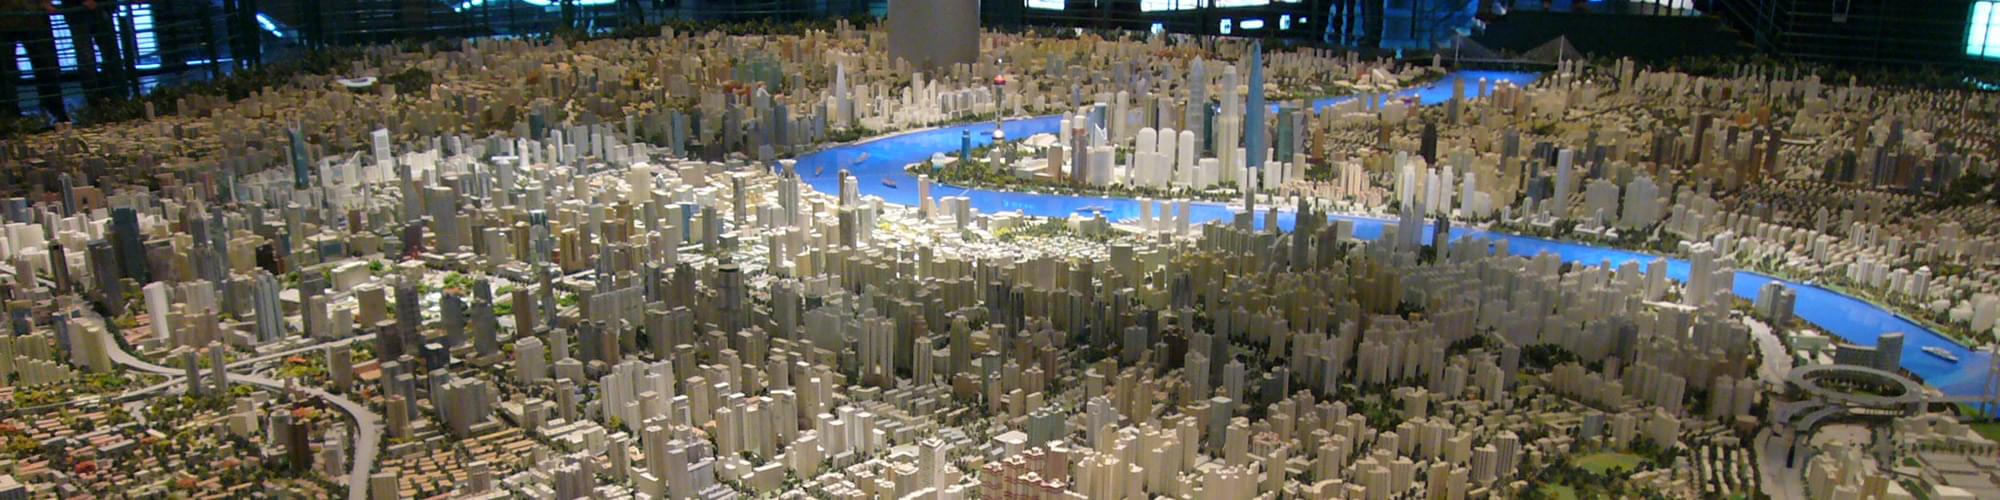 Model of the city at the Shanghai Urban Planning Exhibition Centre